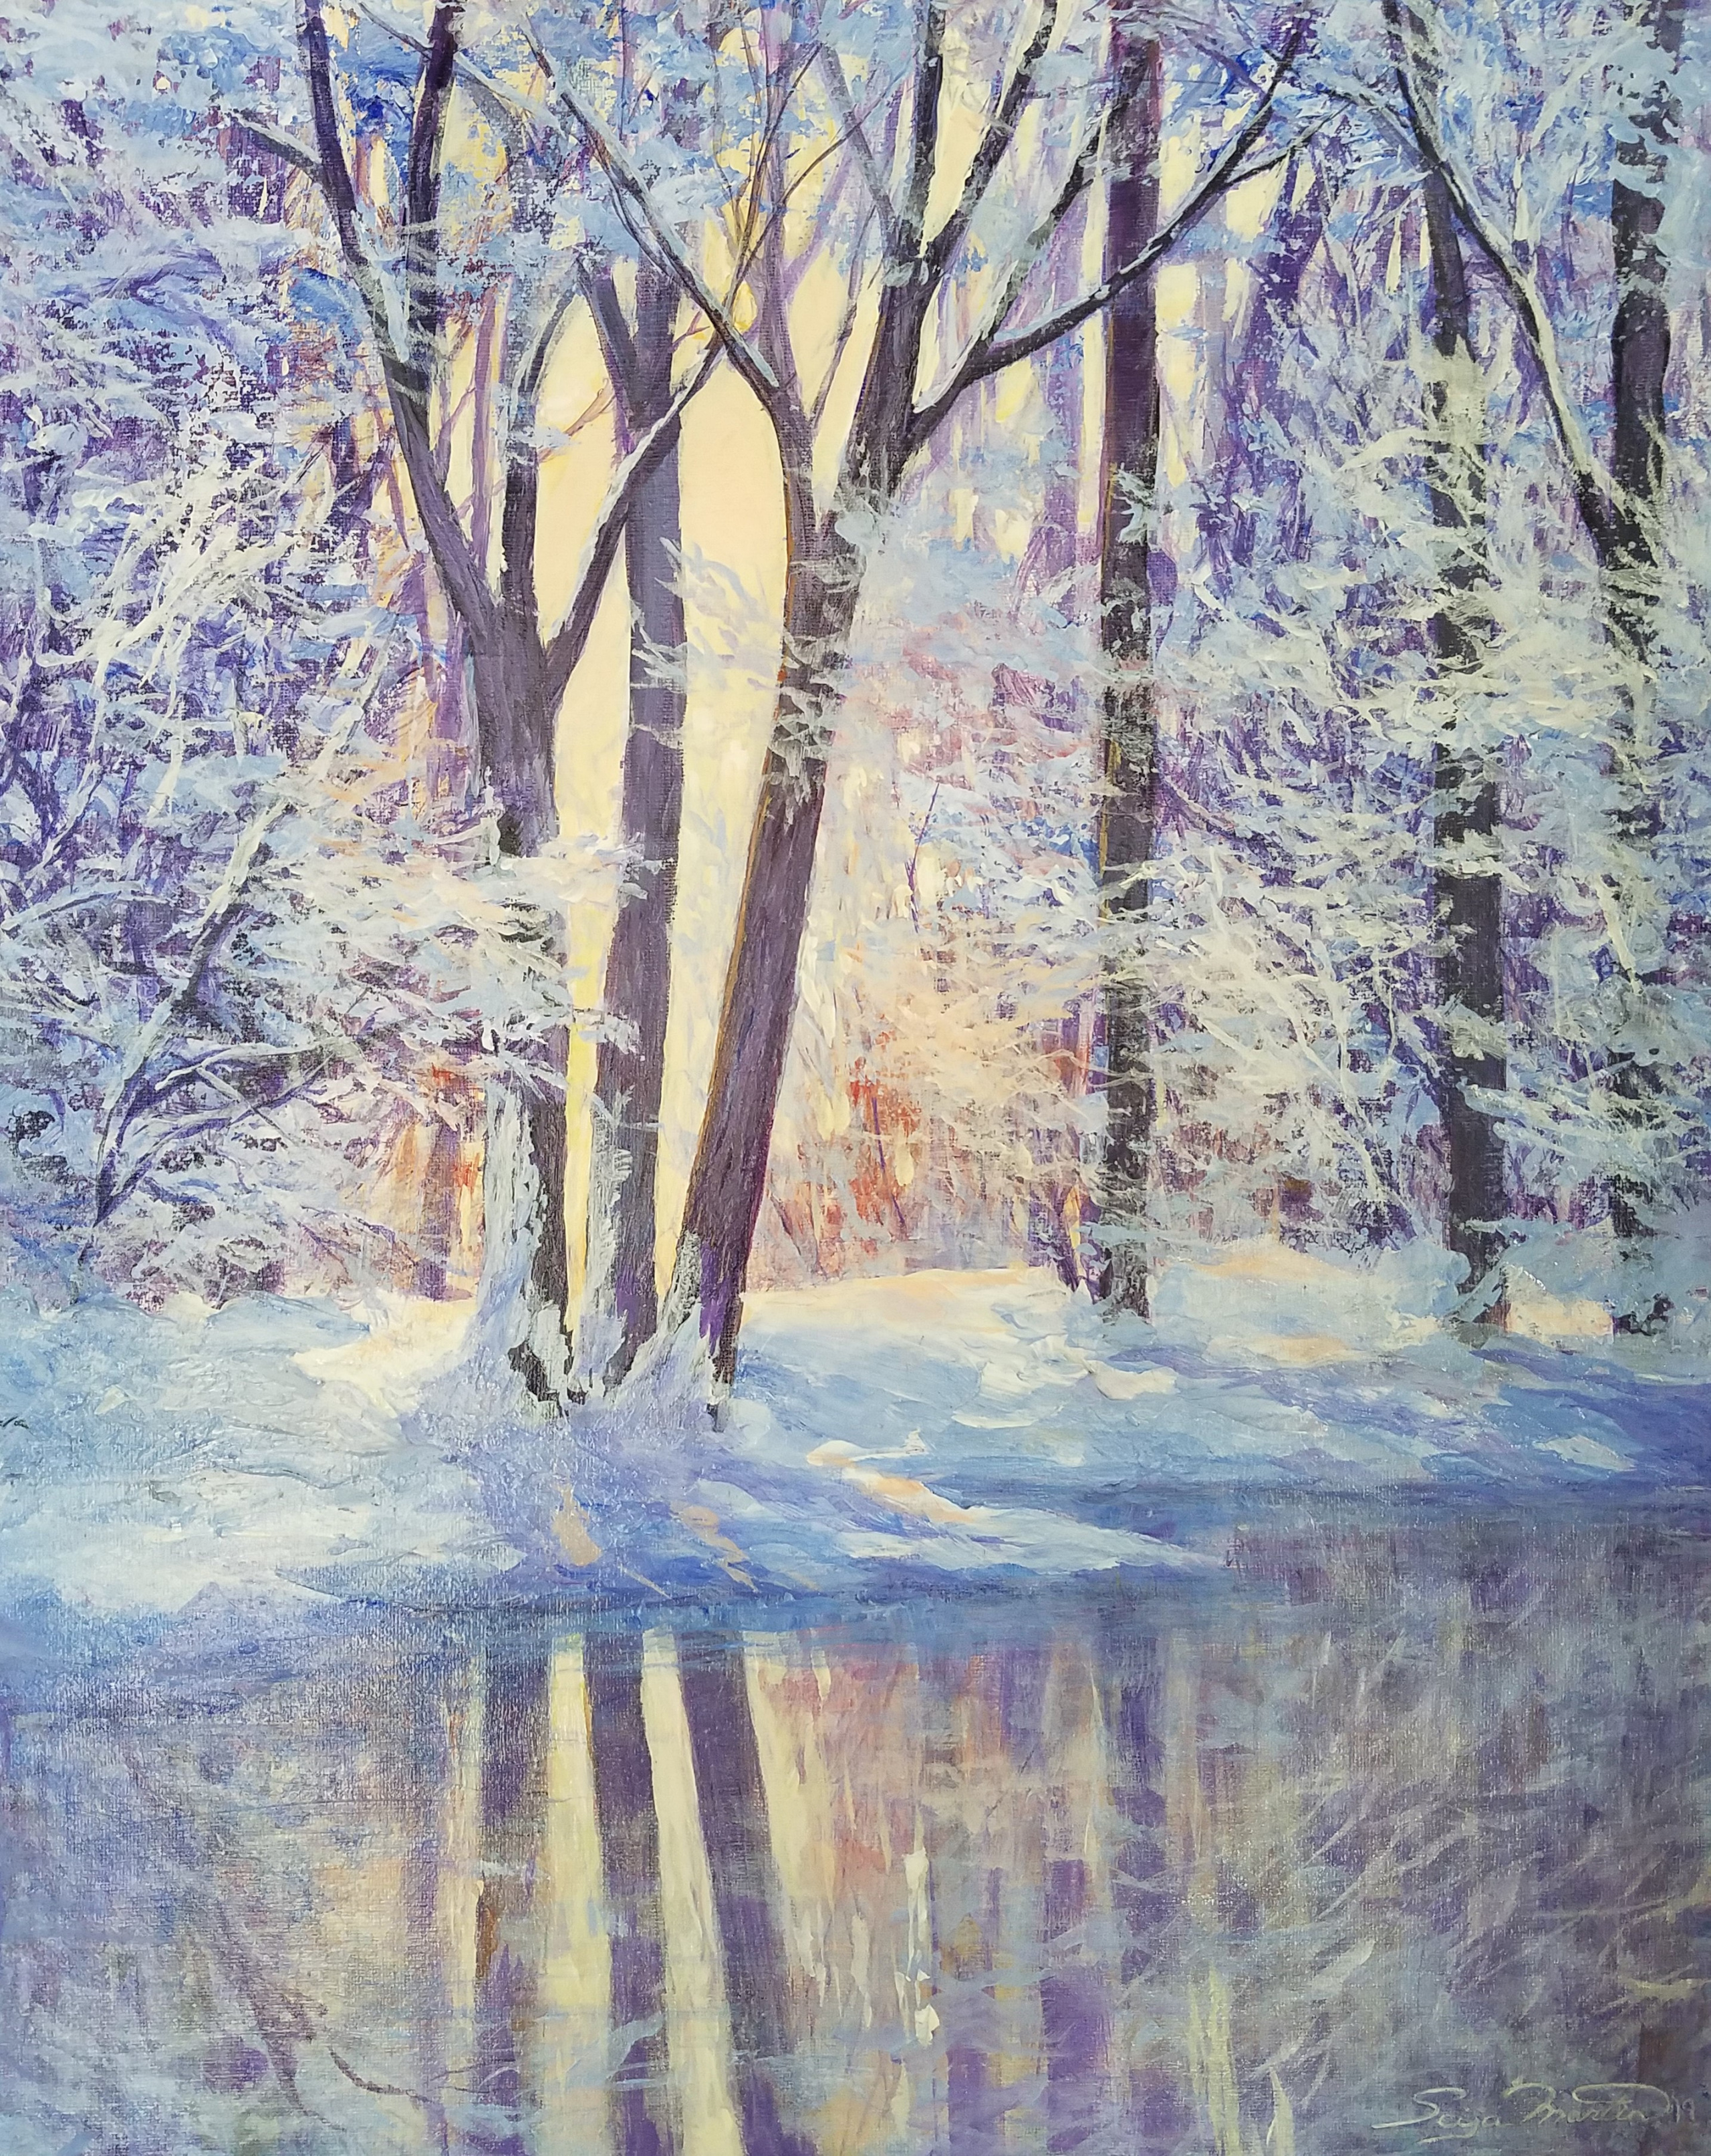 Early Snow - Oil Painting by Seija Martin at Art Works Richmond